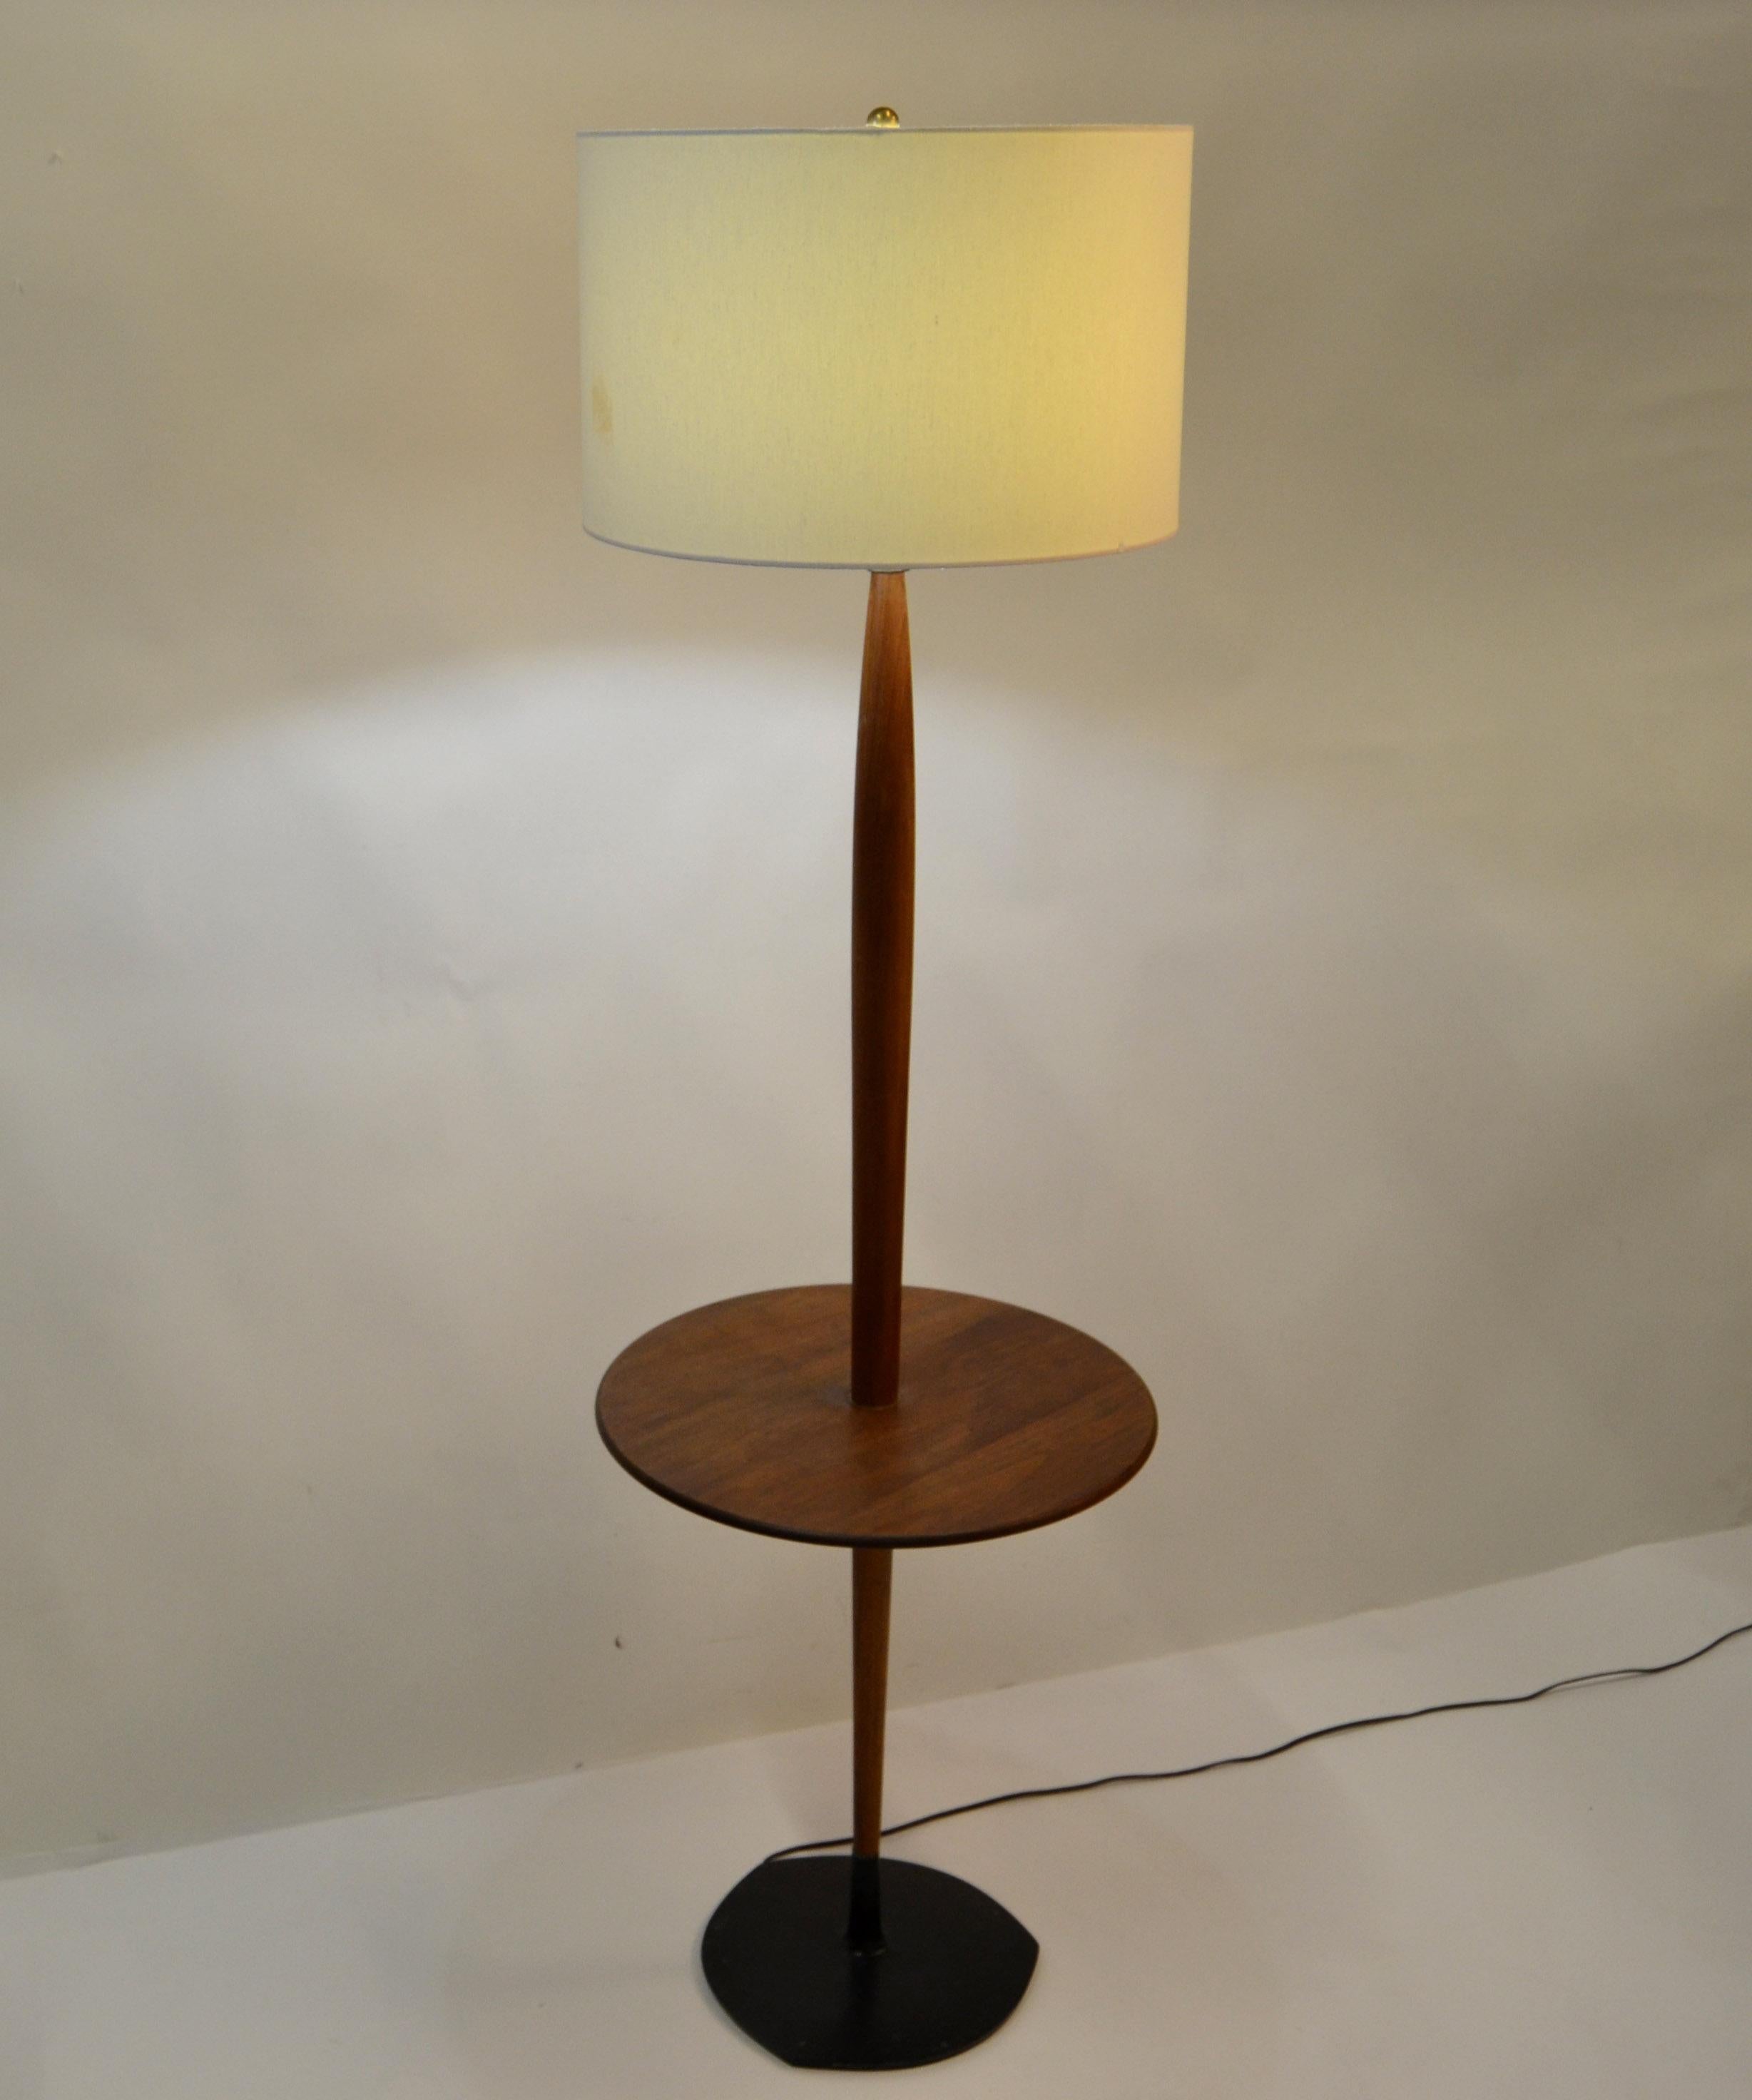 Walnut floor lamp with round side table tapered Stem inserted in the black unique shaped steel base, made by Laurel Lamp Company, circa 1960s.
US Rewiring and takes 1 regular or LED Light.
Practical as well as beautiful designed this Floor Lamp